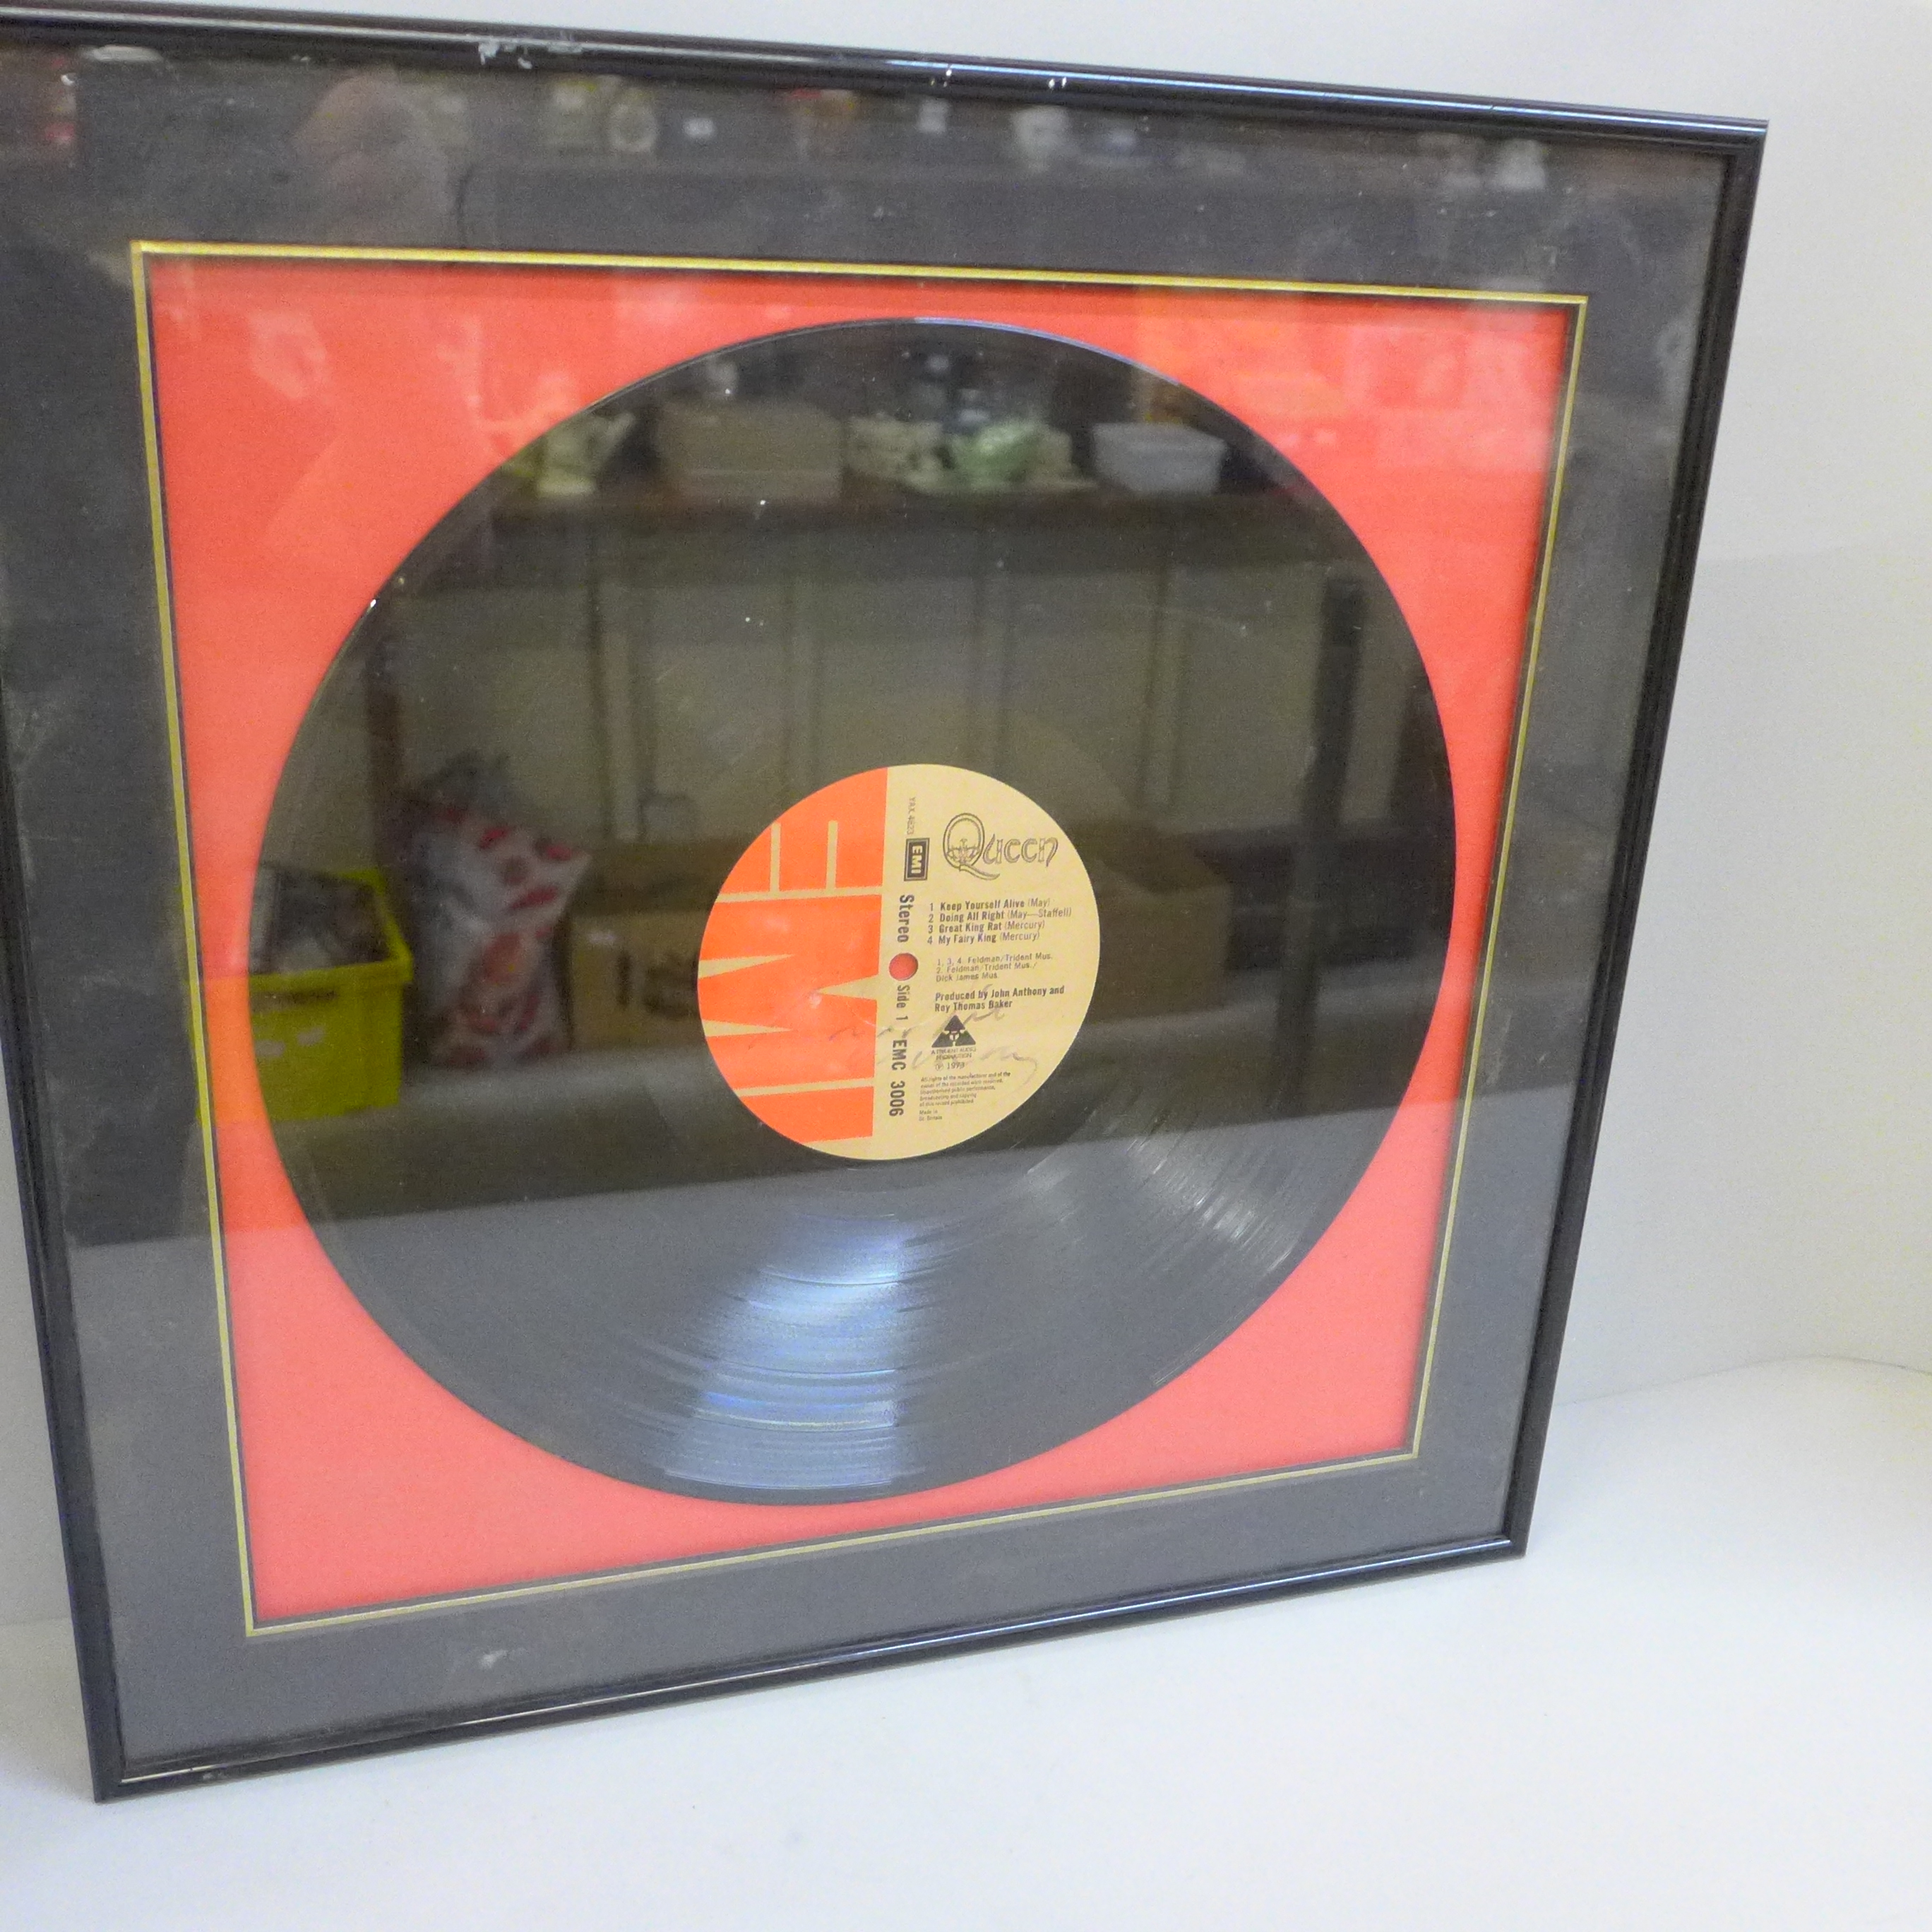 A Freddie Mercury signed Queen LP record, signature faded, with provenance verso